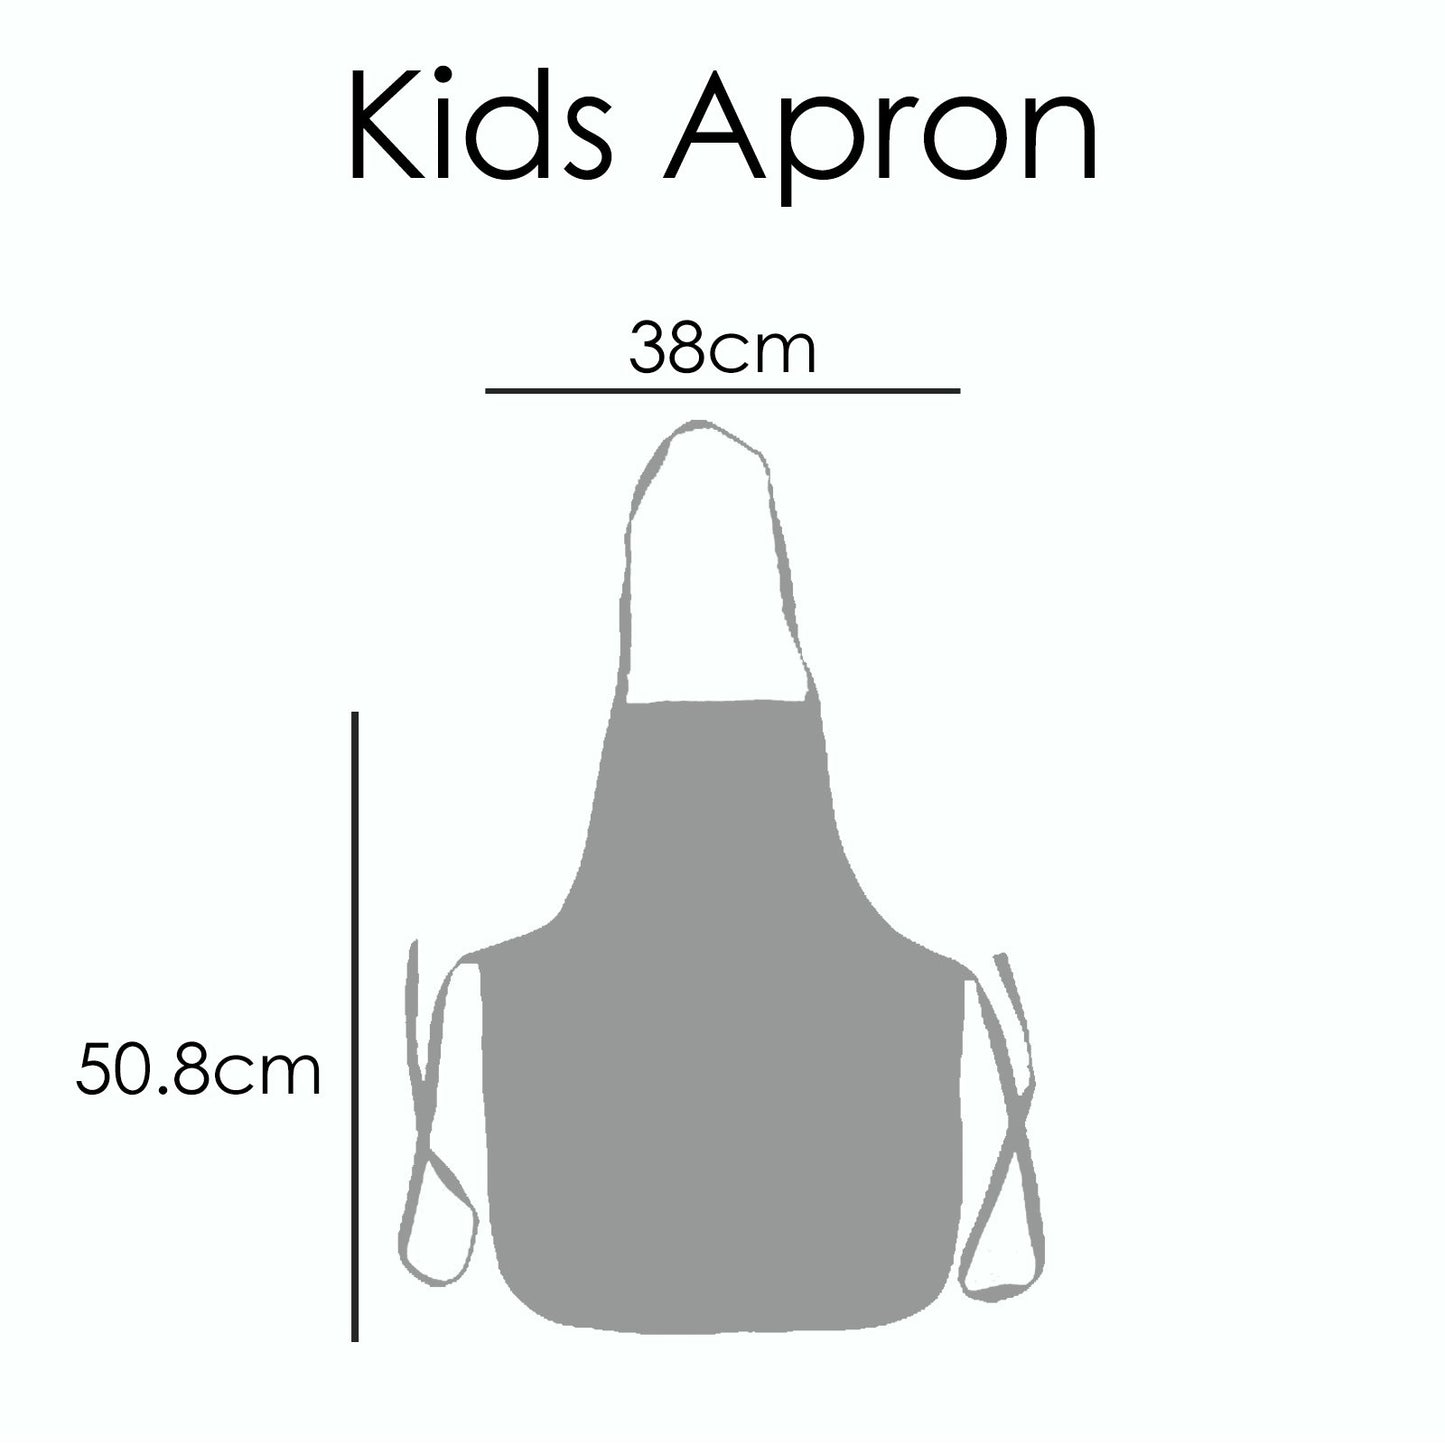 Personalised Apron with Welcoming Text and Embracing Mum and Baby Hippos